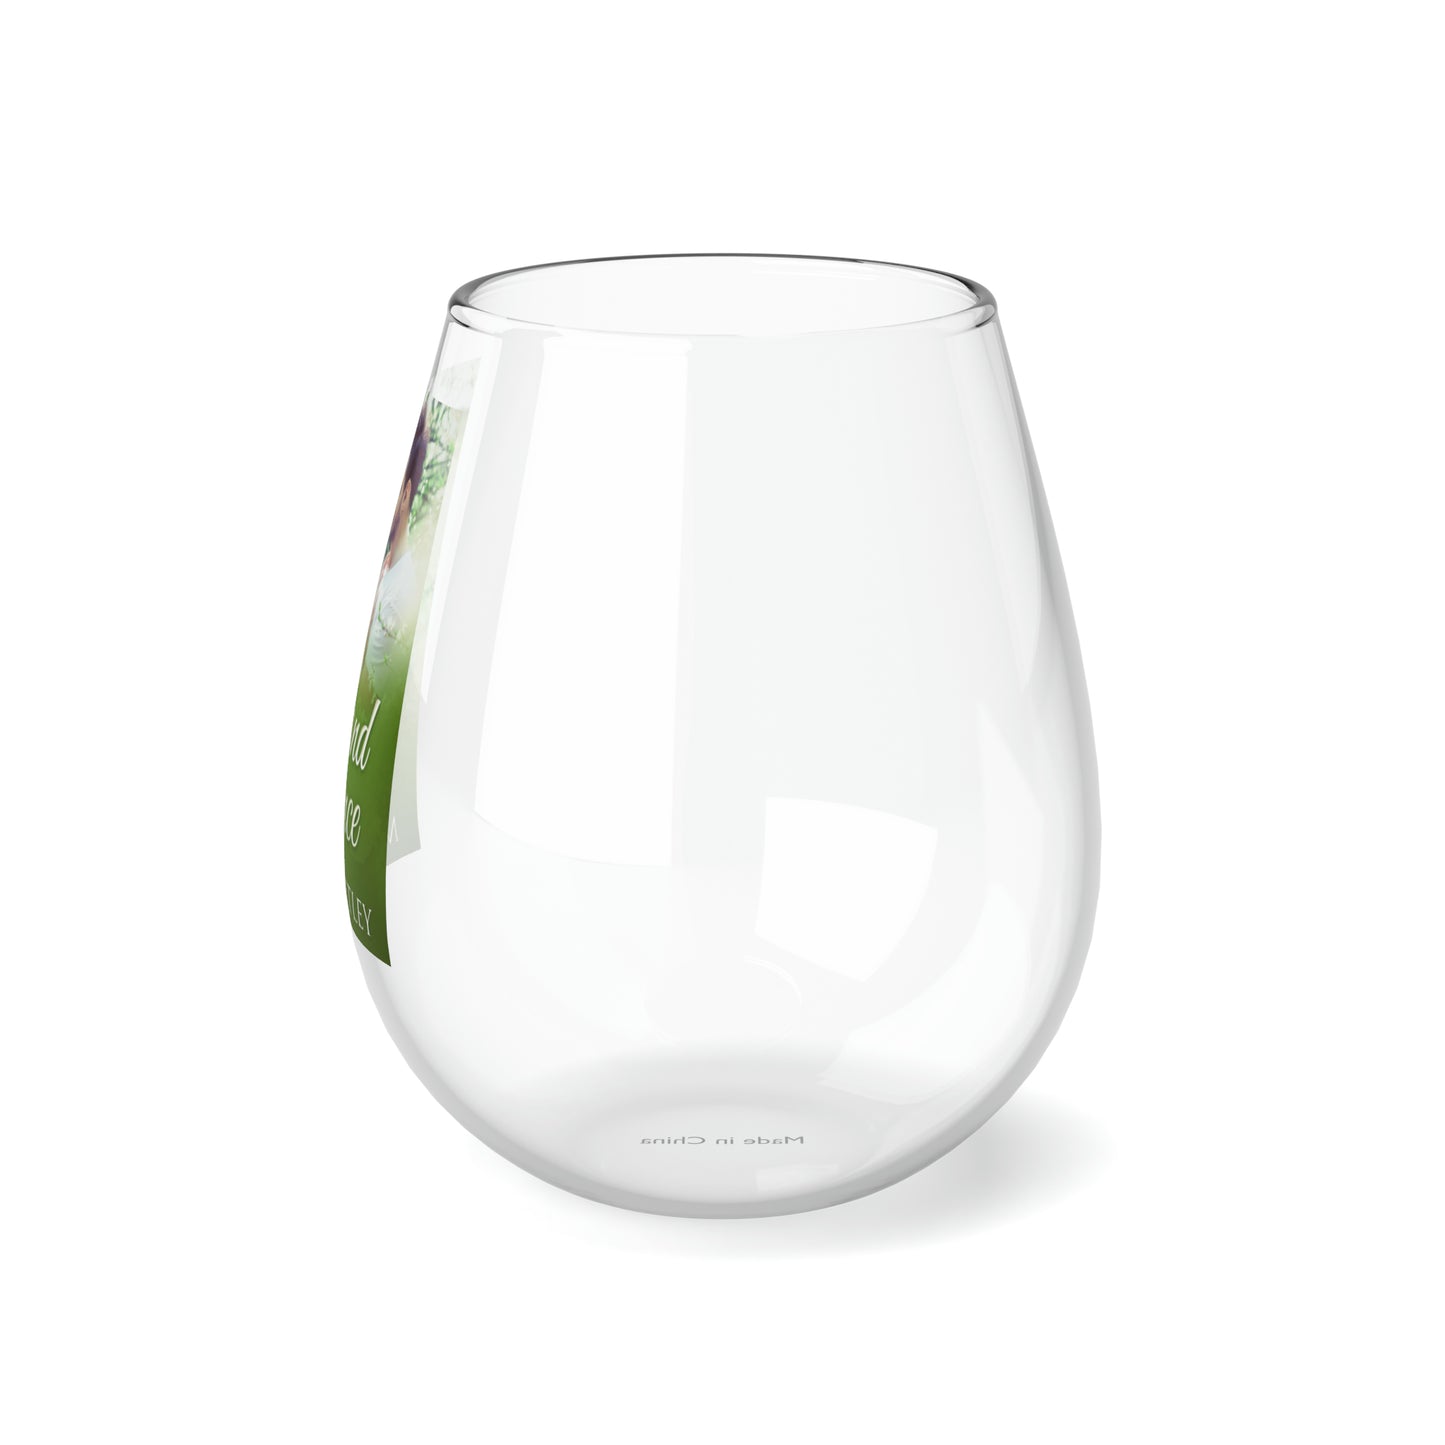 The Second Chance - Stemless Wine Glass, 11.75oz